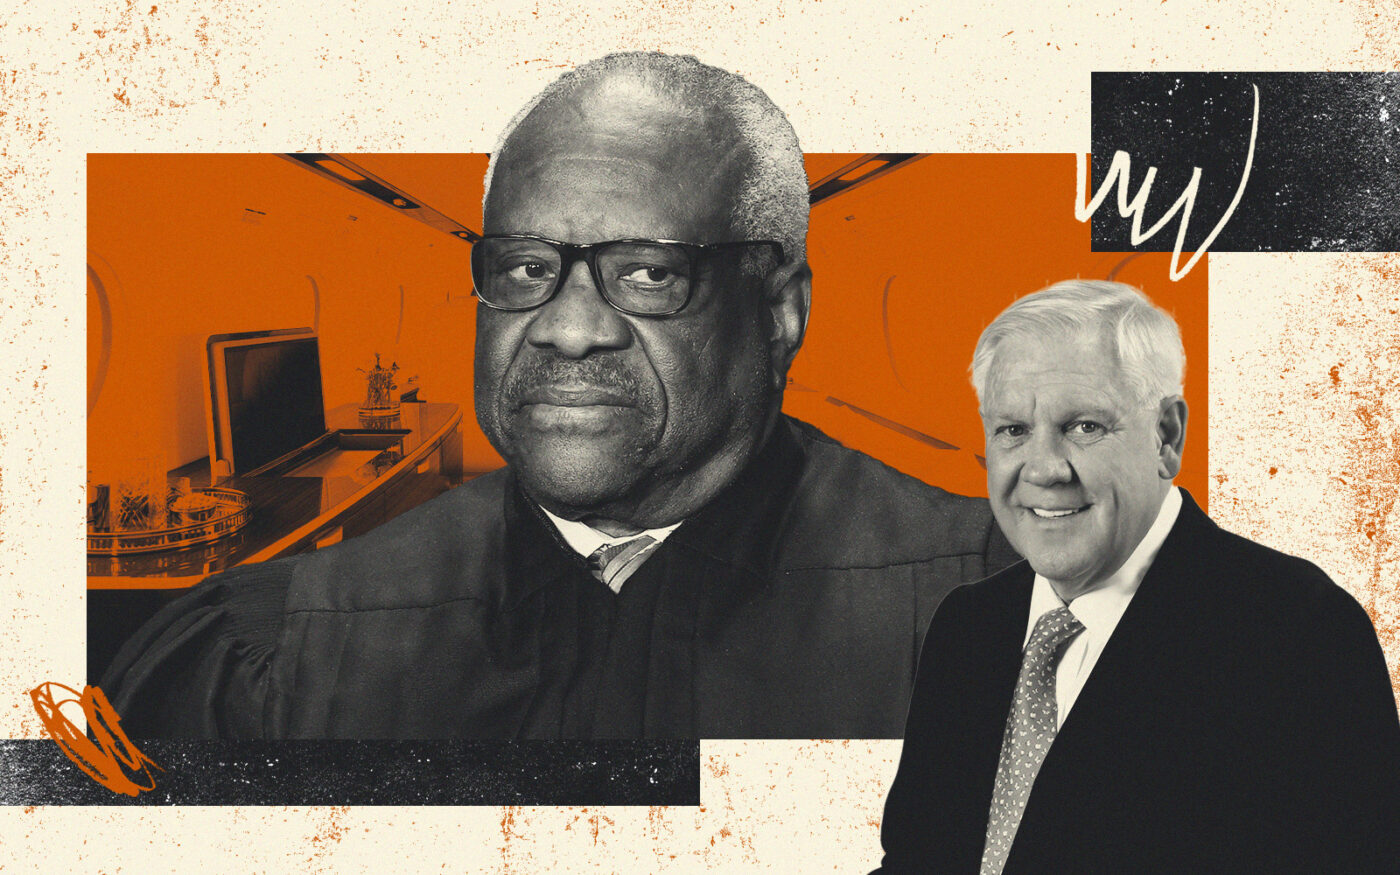 Justice Clarence Thomas Admits to Gifts From Harlan Crow